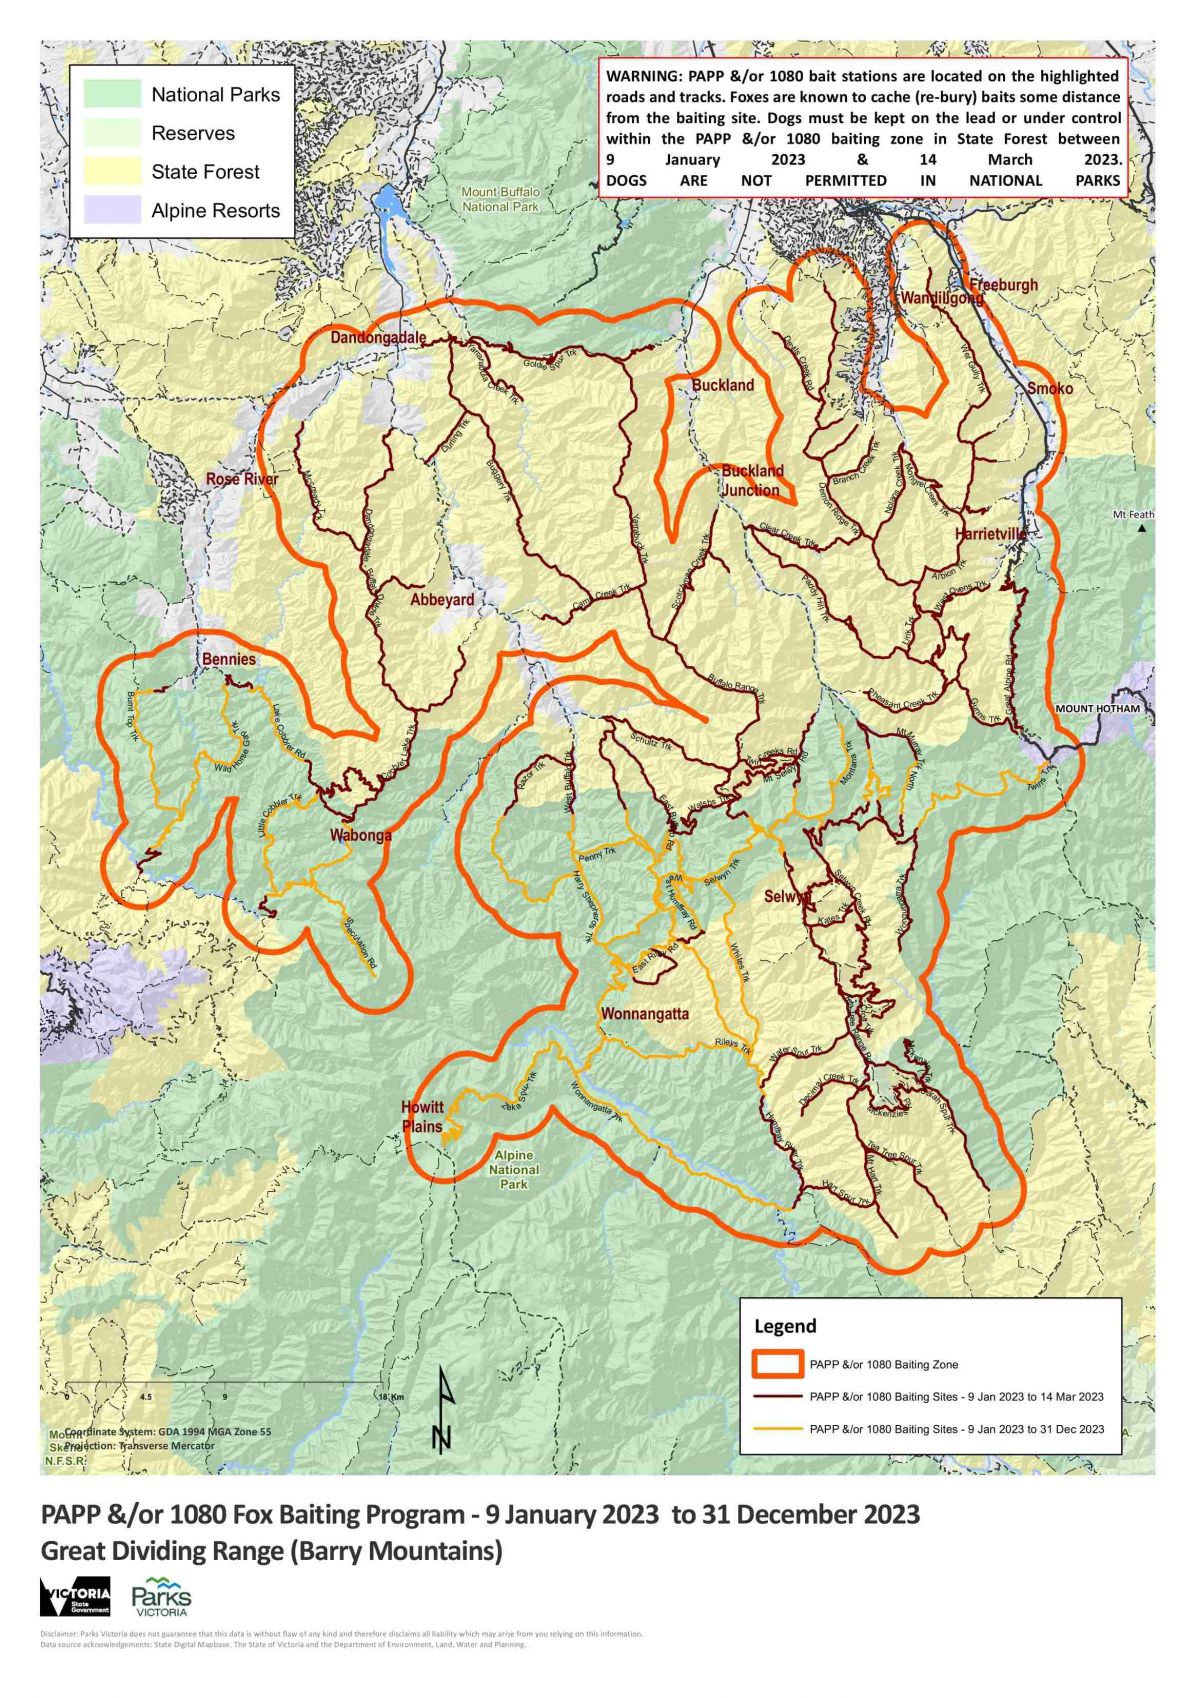 Barry Mountains fox baiting map 9 January 2023 – 31 December 2023    Map of Barry Mountains in Victoria’s Great Dividing Range showing the location of the Barry Mountains 1080 &/or PAPP Fox Baiting Program managed by DELWP Hume and Parks Victoria. The 1080 &/or PAPP baiting zone is located between Mount Buffalo National Park in the north, Mount Hotham in the east, Alpine National Park in the south, and Mount Buller in the west. The northern half of the 1080 &/or PAPP baiting zone sits mainly across State Forest and includes Dandongadale in the northeast, Wandiligong in the northwest, Buckland Junction, Abbeyard, and Harrietville. The southern half of the 1080 &/or PAPP baiting zone across both National Park and State Forest, and includes Bennies, Wabonga, Howitt Plains, Selwyn and Wonnangatta.    Baiting will occur between 9 January and 14 March 2023 along the following roads and tracks within the baiting zone: Mccready Track, Dandongadale-Buffalo Divide Track, Cobbler Lake Track, Durling Track, Buggery Track, Yarrarabula Creek Track, Goldie Spur Track, Camp Creek Track, Yarrabuck Track, Scothman Creek Track, Buffalo Range Track, Razor Track, West Buffalo Track, East Buffalo Road, Schultz Track, Walshs Track, Mt Selwyn Road, Devils Creek Road, Demon Ridge Track, Branch Creek Track, Clear Creek Track, Nolans Creek Track, Paddy Hill Track, Link Track, Pheasant Creek Track, Mt Murray Track North, Wet Gully Track, Mongrel Creek Track, Albion Track, West Ovens Track, Gunns Track, Selwyn Creek Road, Kates Track, Wongungarra Track, Croft Track, Waters Spur Track, Decimal Creek Track, Mckenzies Road, Sarah Spur Track, Humffray River Track, Hart Spur Track, Mt Hart Track, and Tea Tree Spur Track.     Baiting will occur between 13 December 2022 and 31 December 2023 along the following roads and tracks within the baiting zone: Burnt Top Track, Wild Horse Gap Track, Cherry Tree Track, Lake Cobbler Road, Little Cobbler Track, Speculation Road, Razor Track, West Buffalo Track, Penny Track, Harry Shepherds Track, Zeka Spur Track, East Buffalo Road, East Riley Road, West Humffray Road, Rileys Track, Wonnangatta Track, Selwyn Track, Whites Track, Humffray River Track, Montana Track, Mt Murray Track North, and Twins Track.   Warning: 1080 &/or PAPP bait stations are located on the mentioned roads and tracks. Foxes are known to cache (re-bury) baits some distance from the baiting site. Dogs must be kept on the lead or under control within the 1080 &/or PAPP baiting zone in State Forest between 13 December 2022 and 31 December 2023. Dogs are not permitted in National Parks.